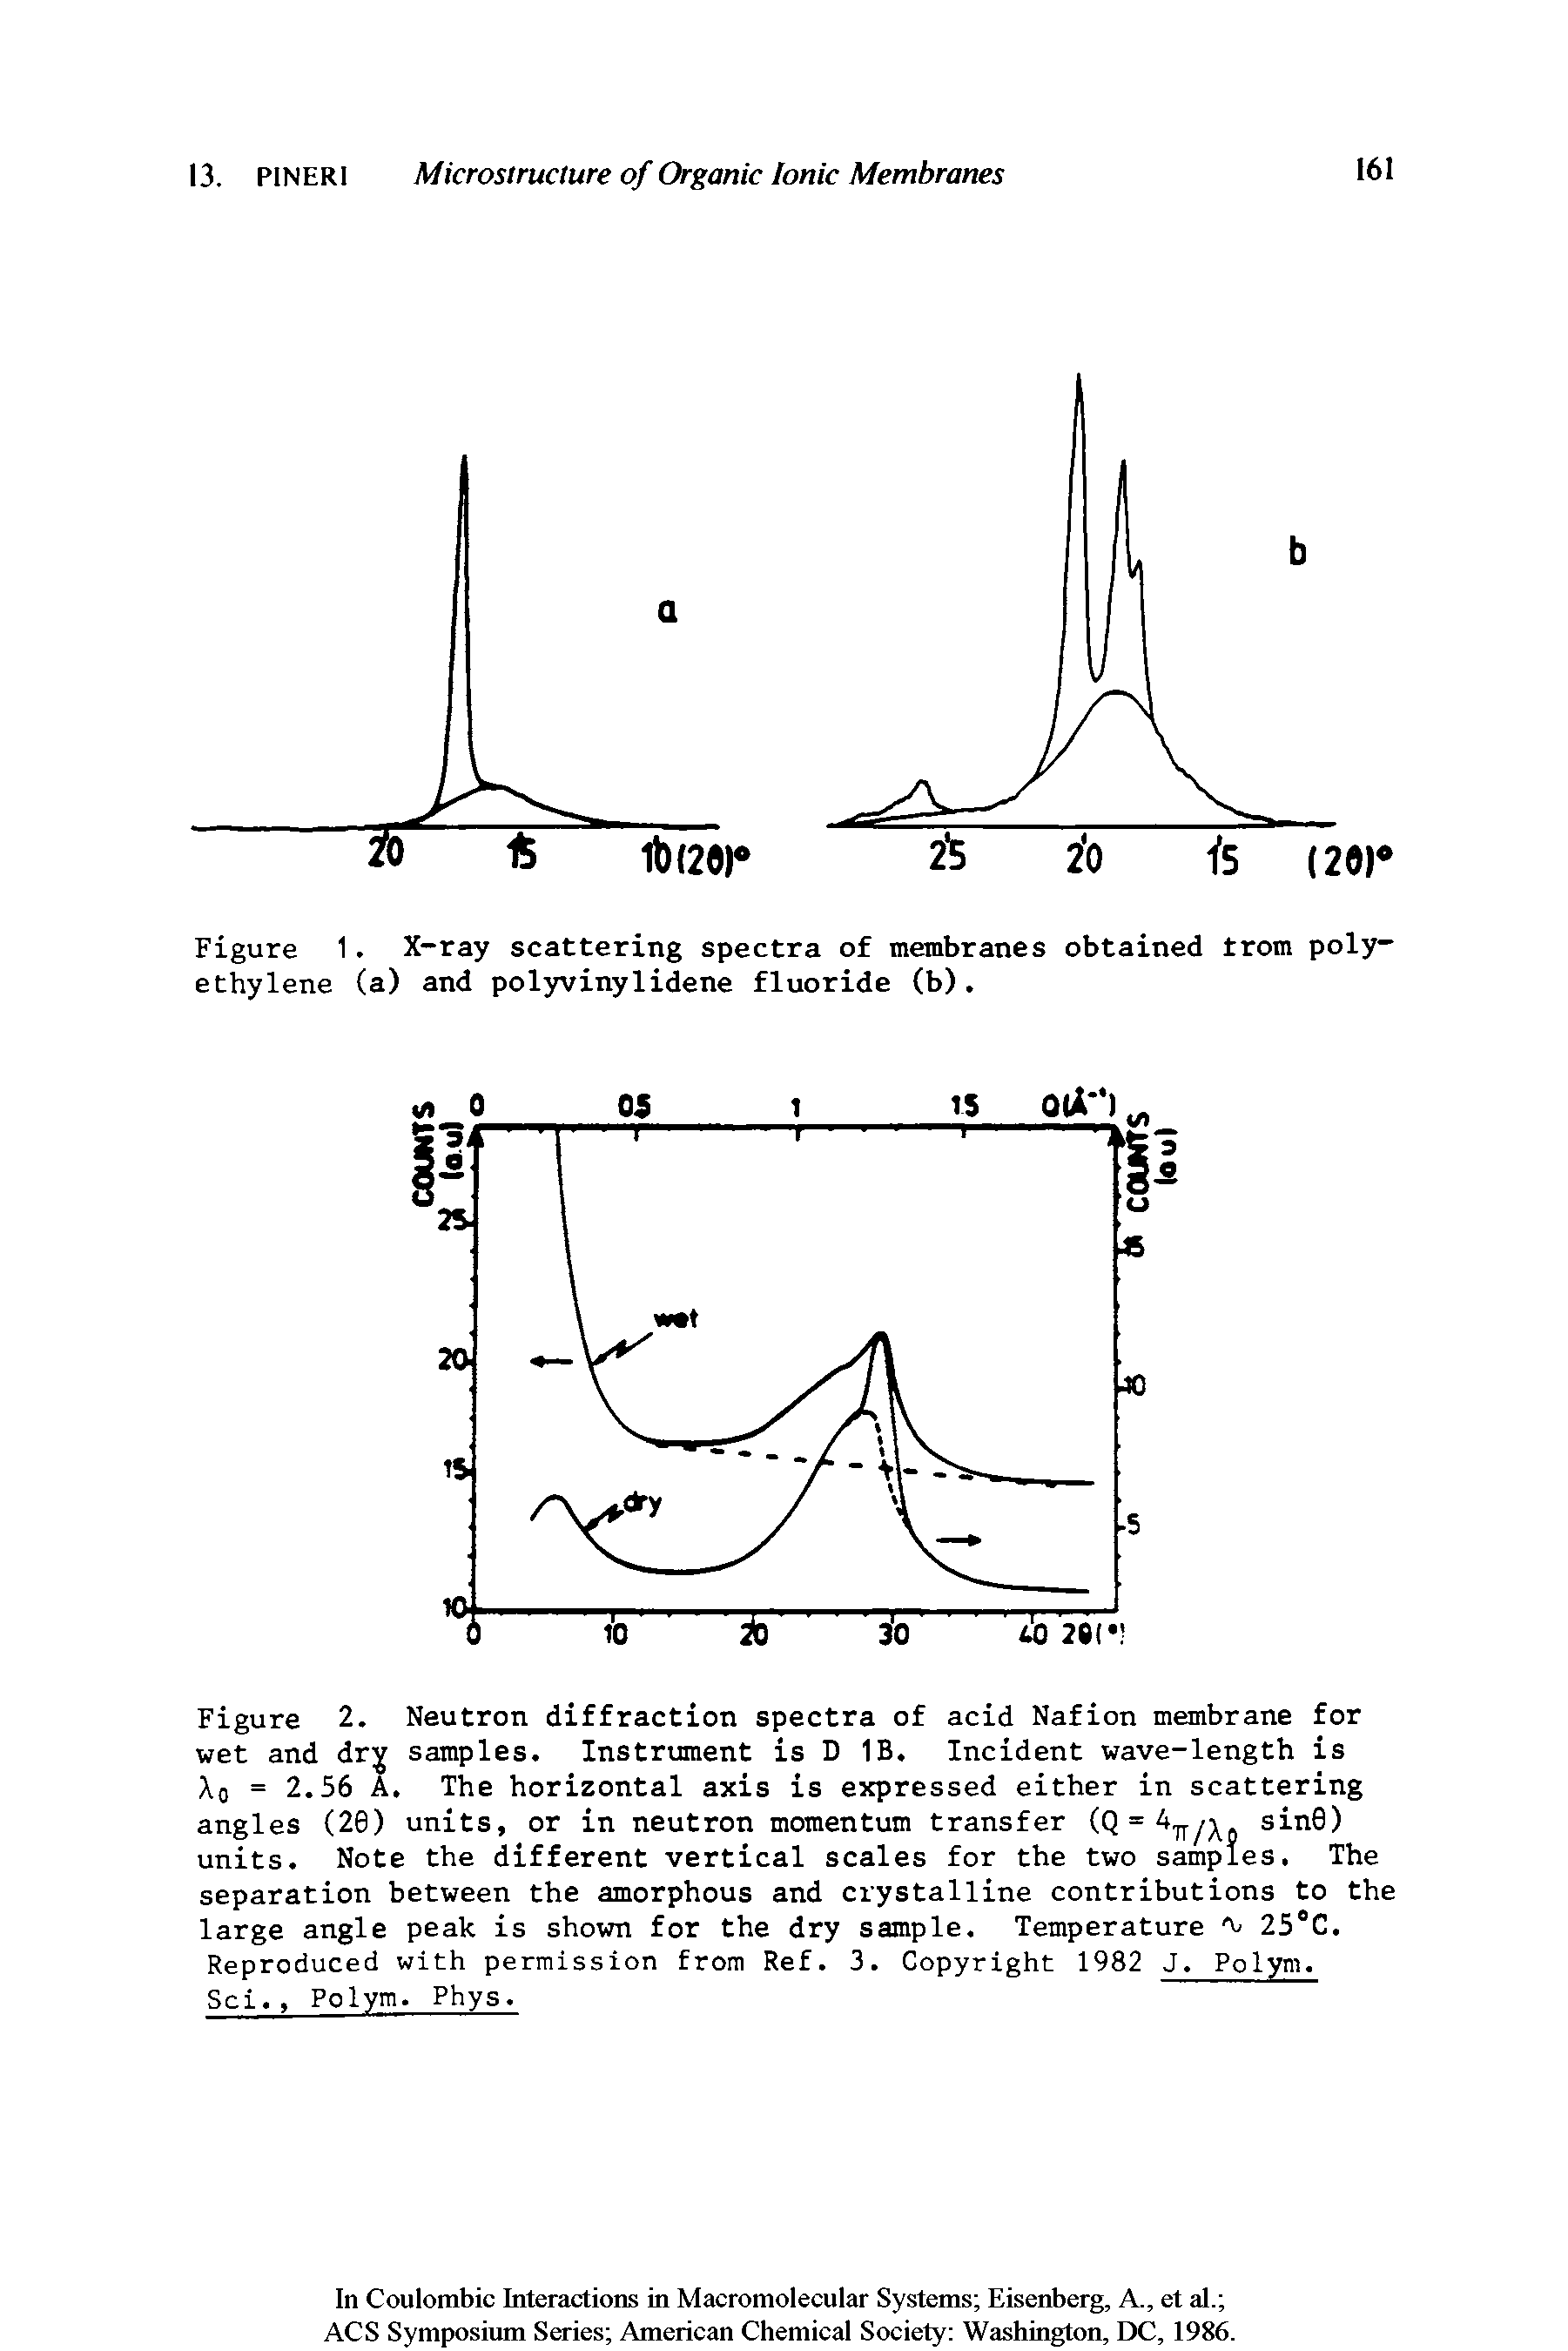 Figure 2. Neutron diffraction spectra of acid Nafion membrane for wet and dr samples. Instrument is D 1B. Incident wave-length is Ao = 2.56 A. The horizontal axis is expressed either in scattering angles (20) units, or in neutron momentum transfer (Q = tt/Xo stn0) units. Note the different vertical scales for the two samples. The separation between the amorphous and crystalline contributions to the large angle peak is shown for the dry sample. Temperature 25°C.